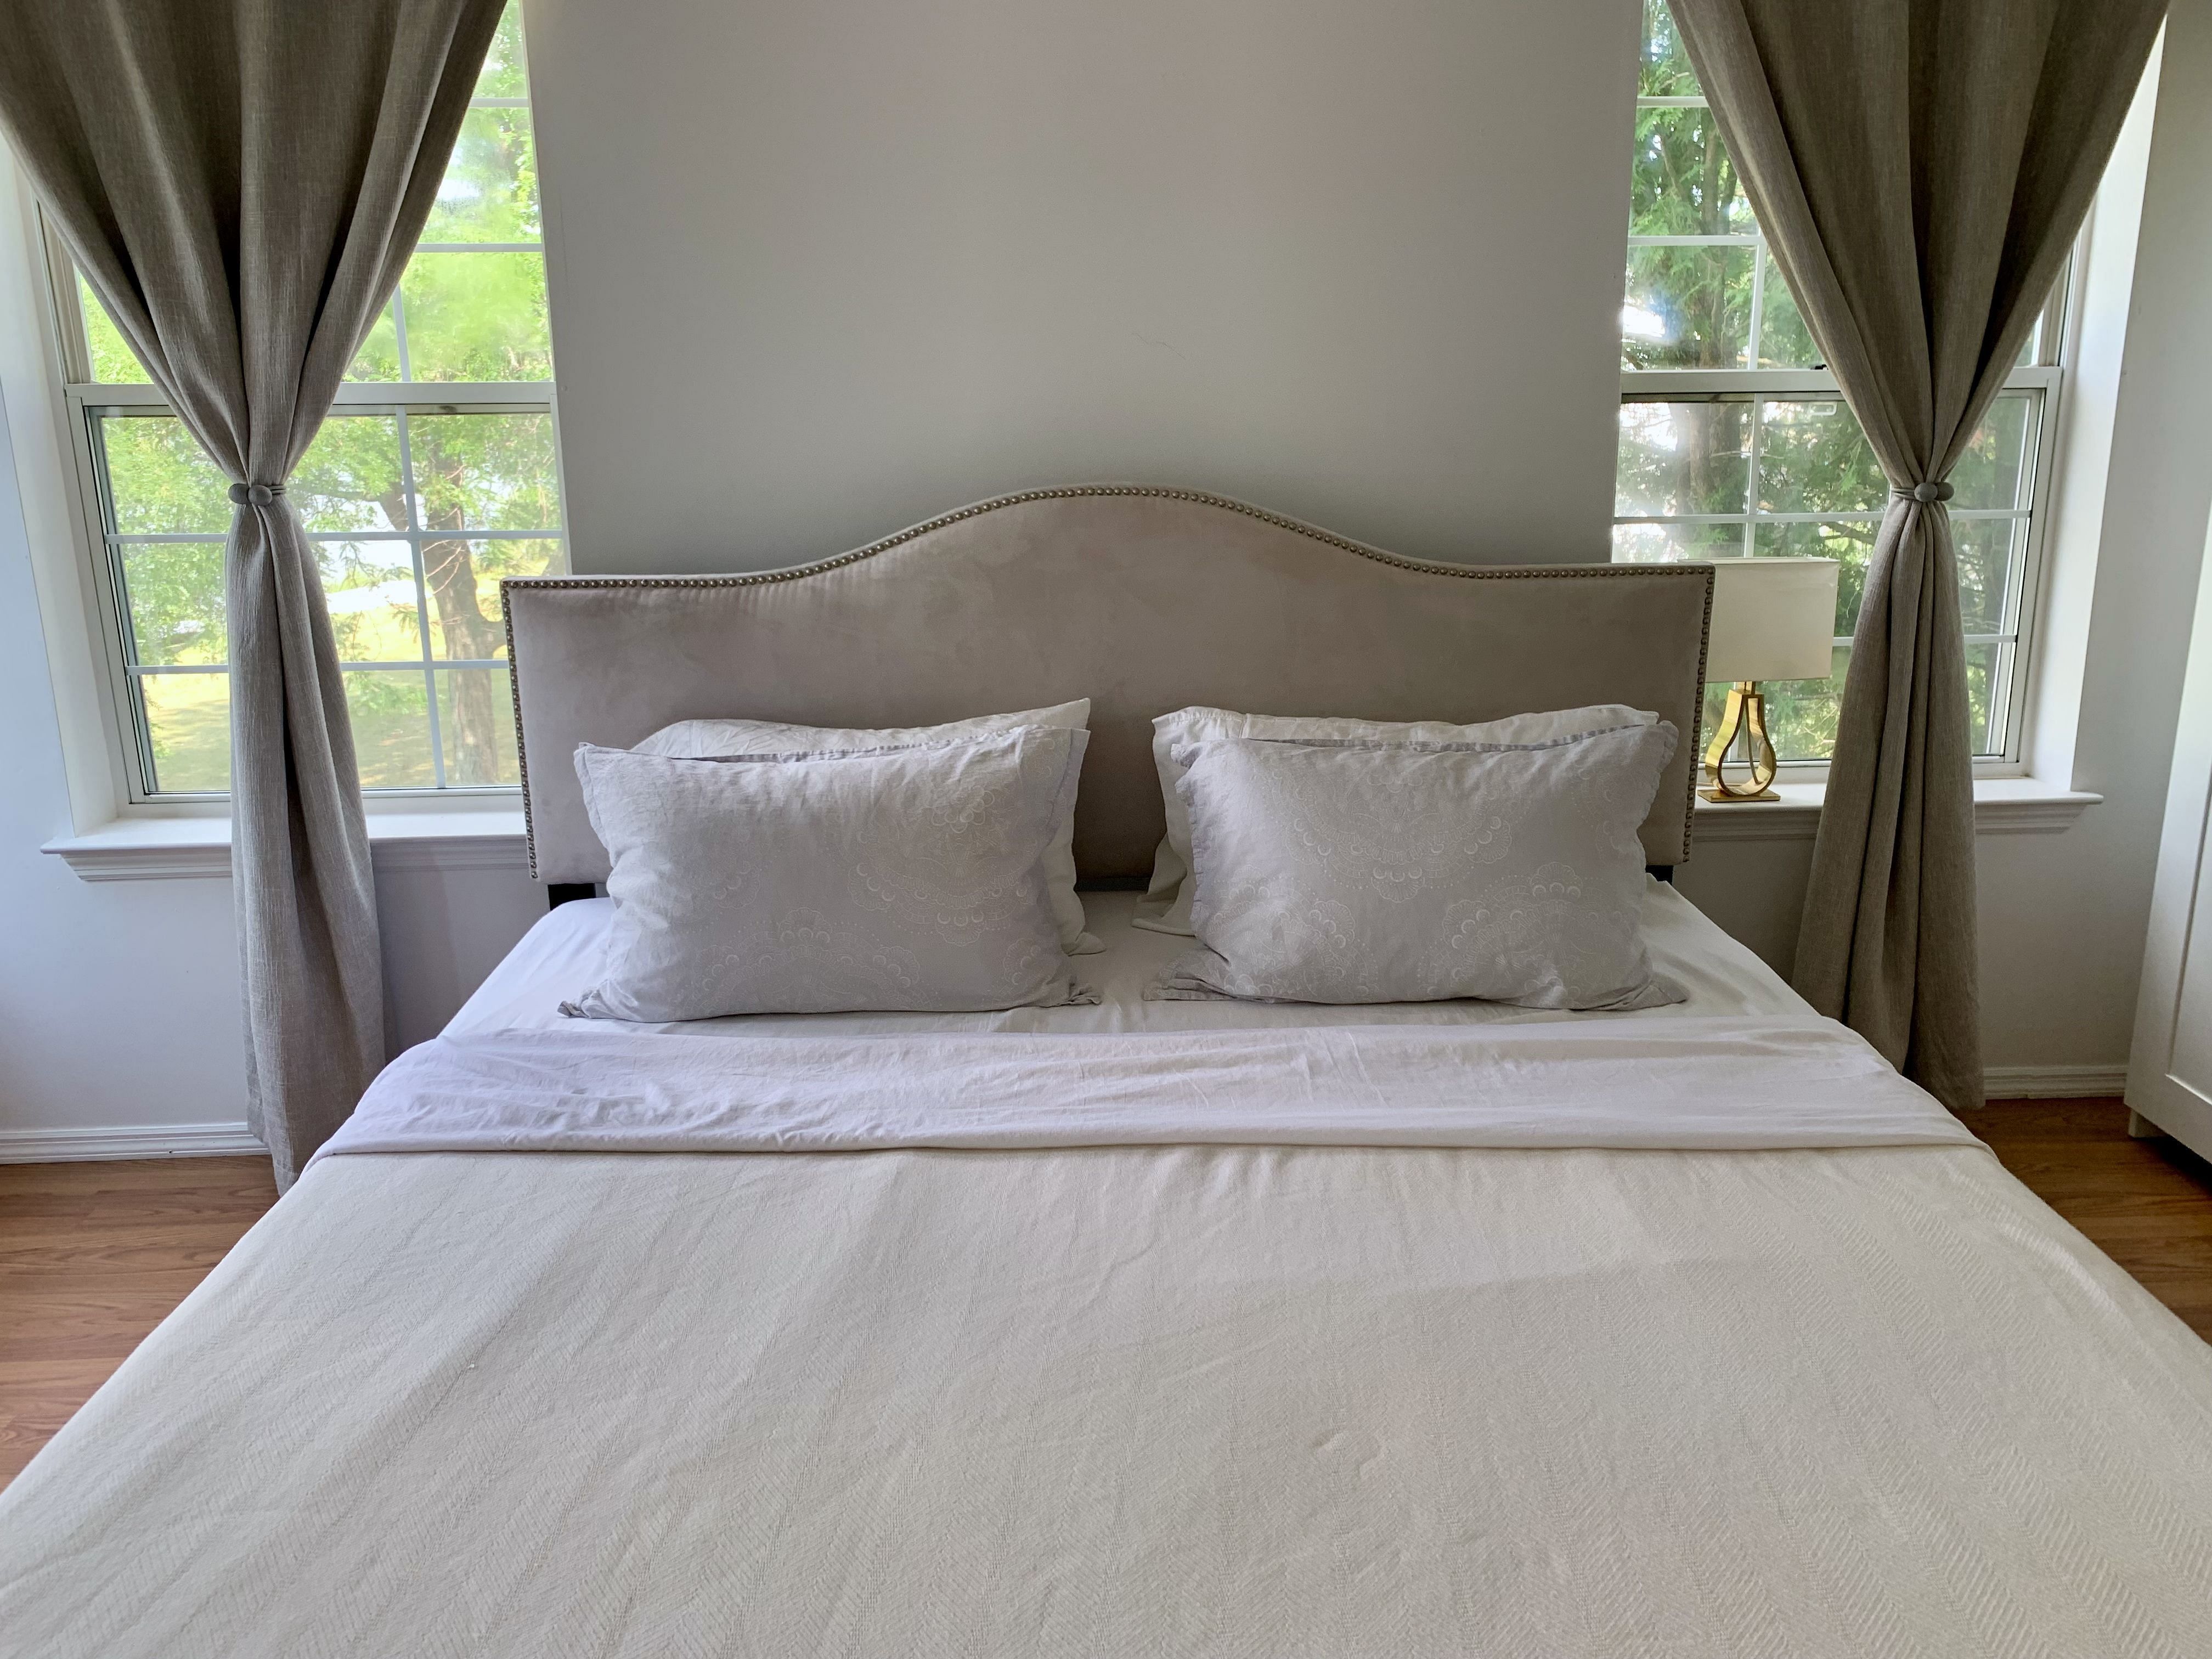 JWguest Condominium at Middletown, New York | Serene master bedroom with a lakeview | Jwbnb no brobnb 1